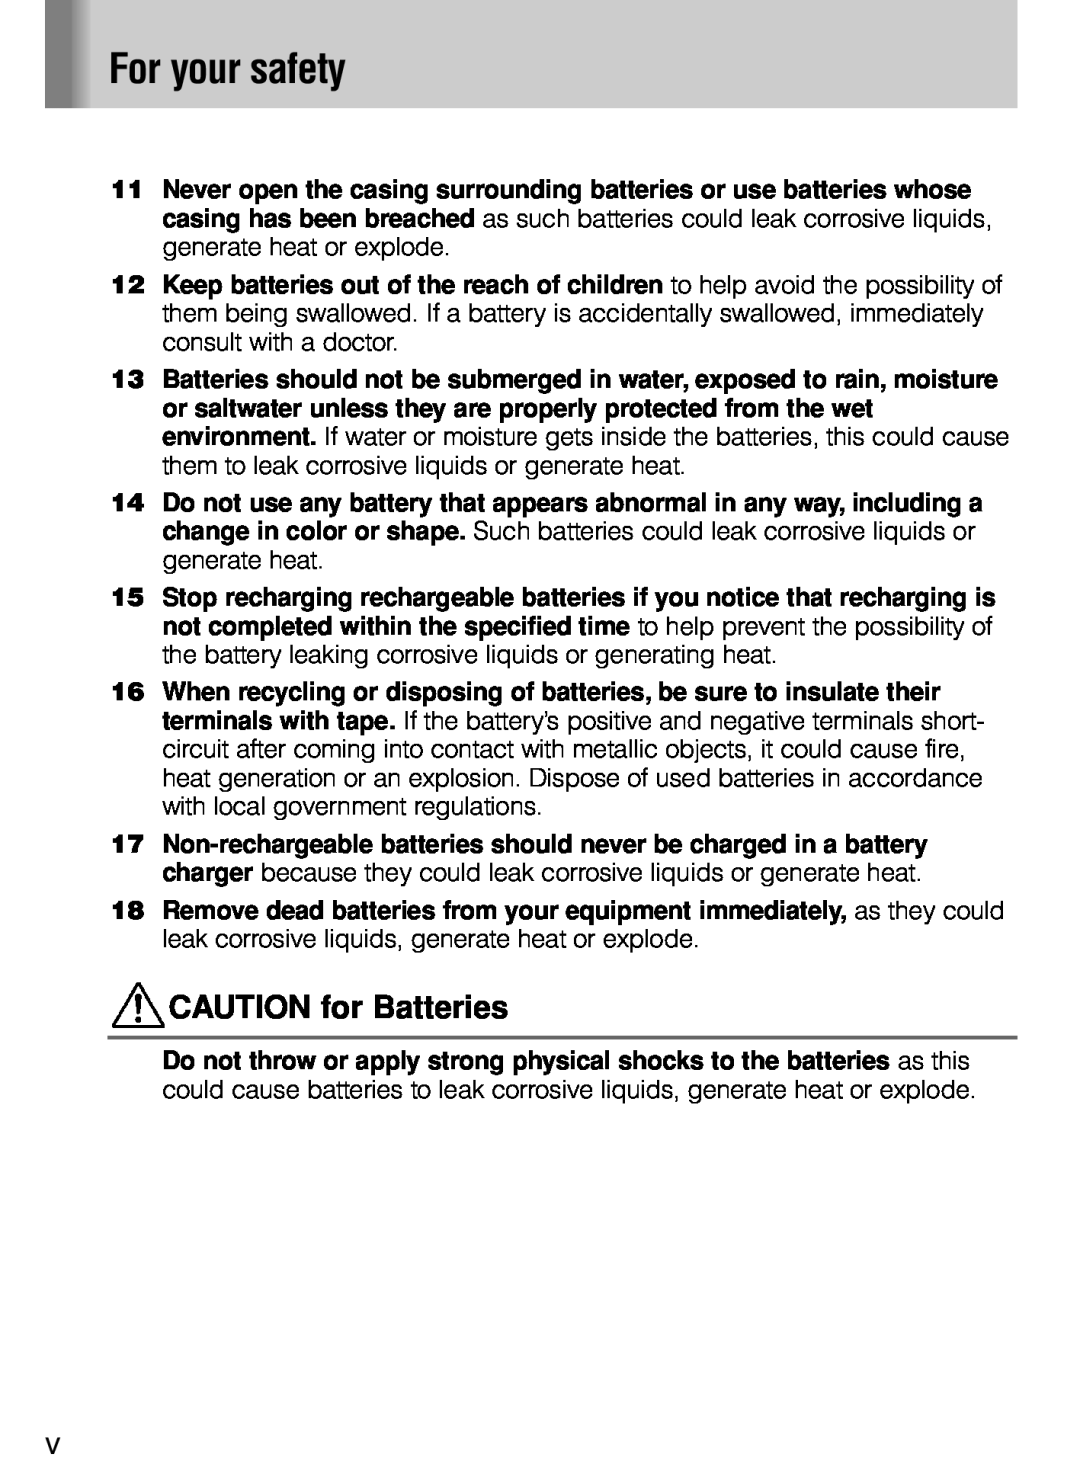 Nikon SB-800 instruction manual CAUTION for Batteries, For your safety 